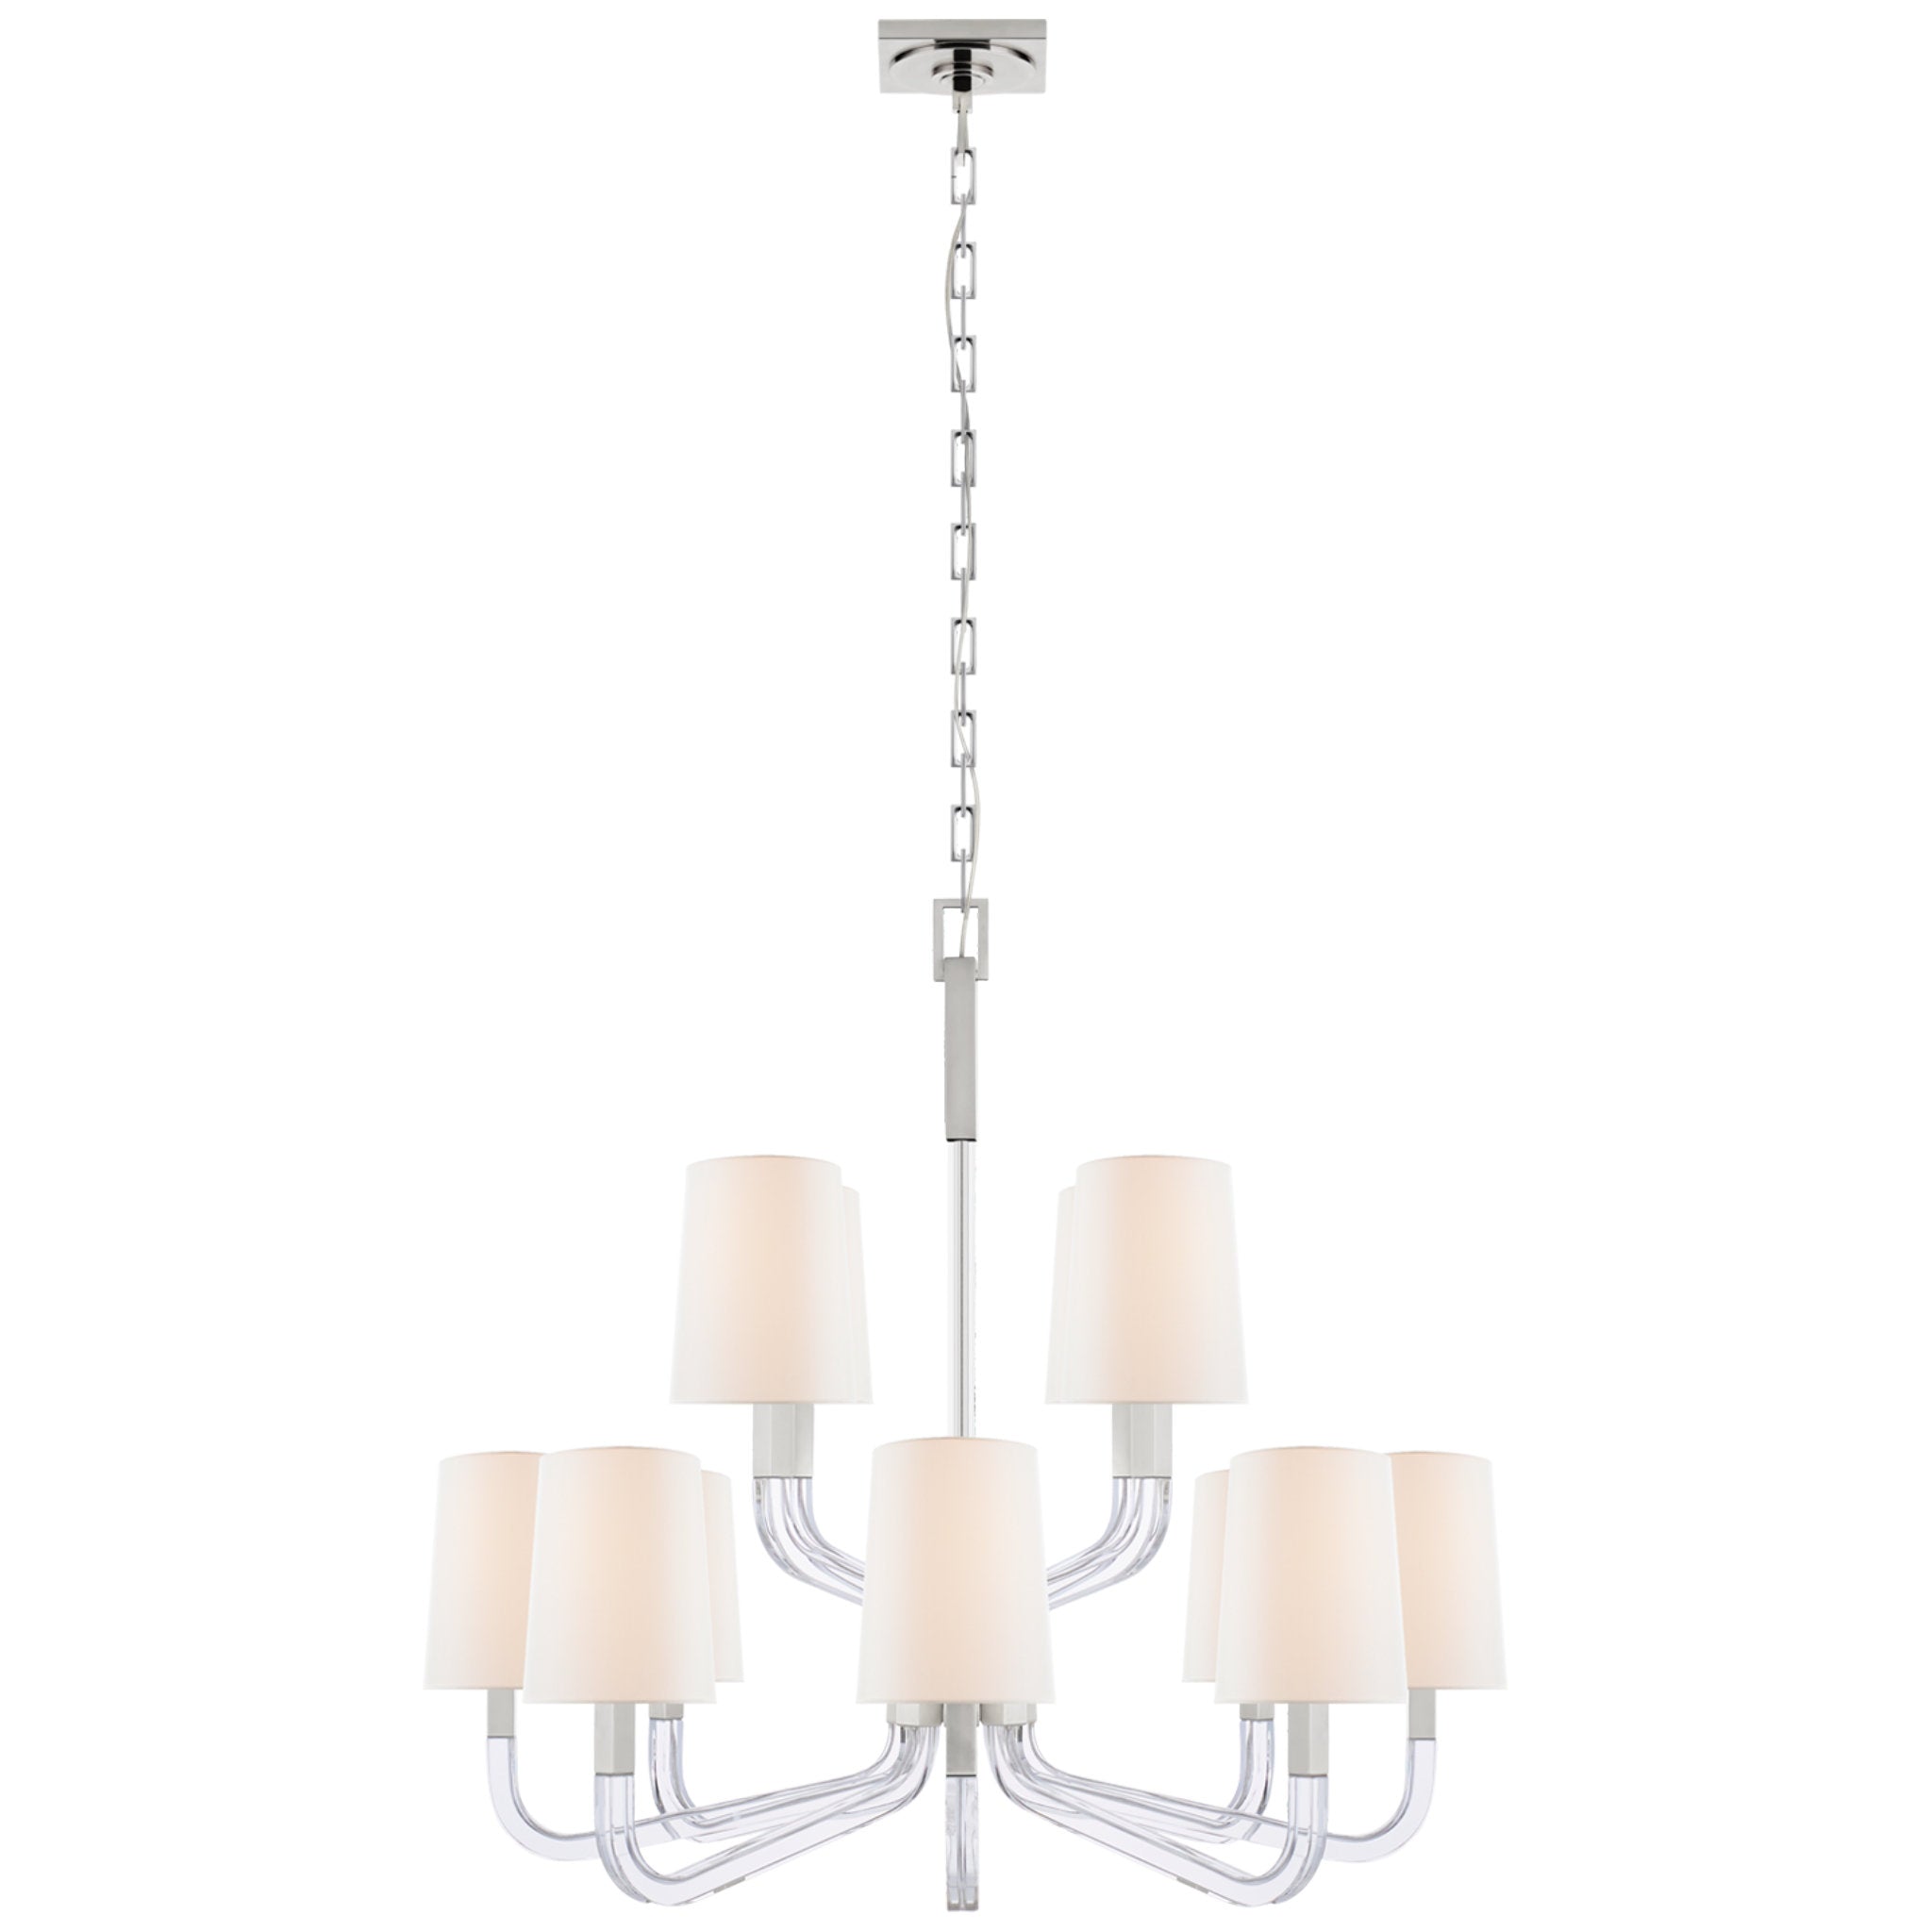 Chapman & Myers Reagan Medium Two Tier Chandelier in Polished Nickel and Crystal with Linen Shades